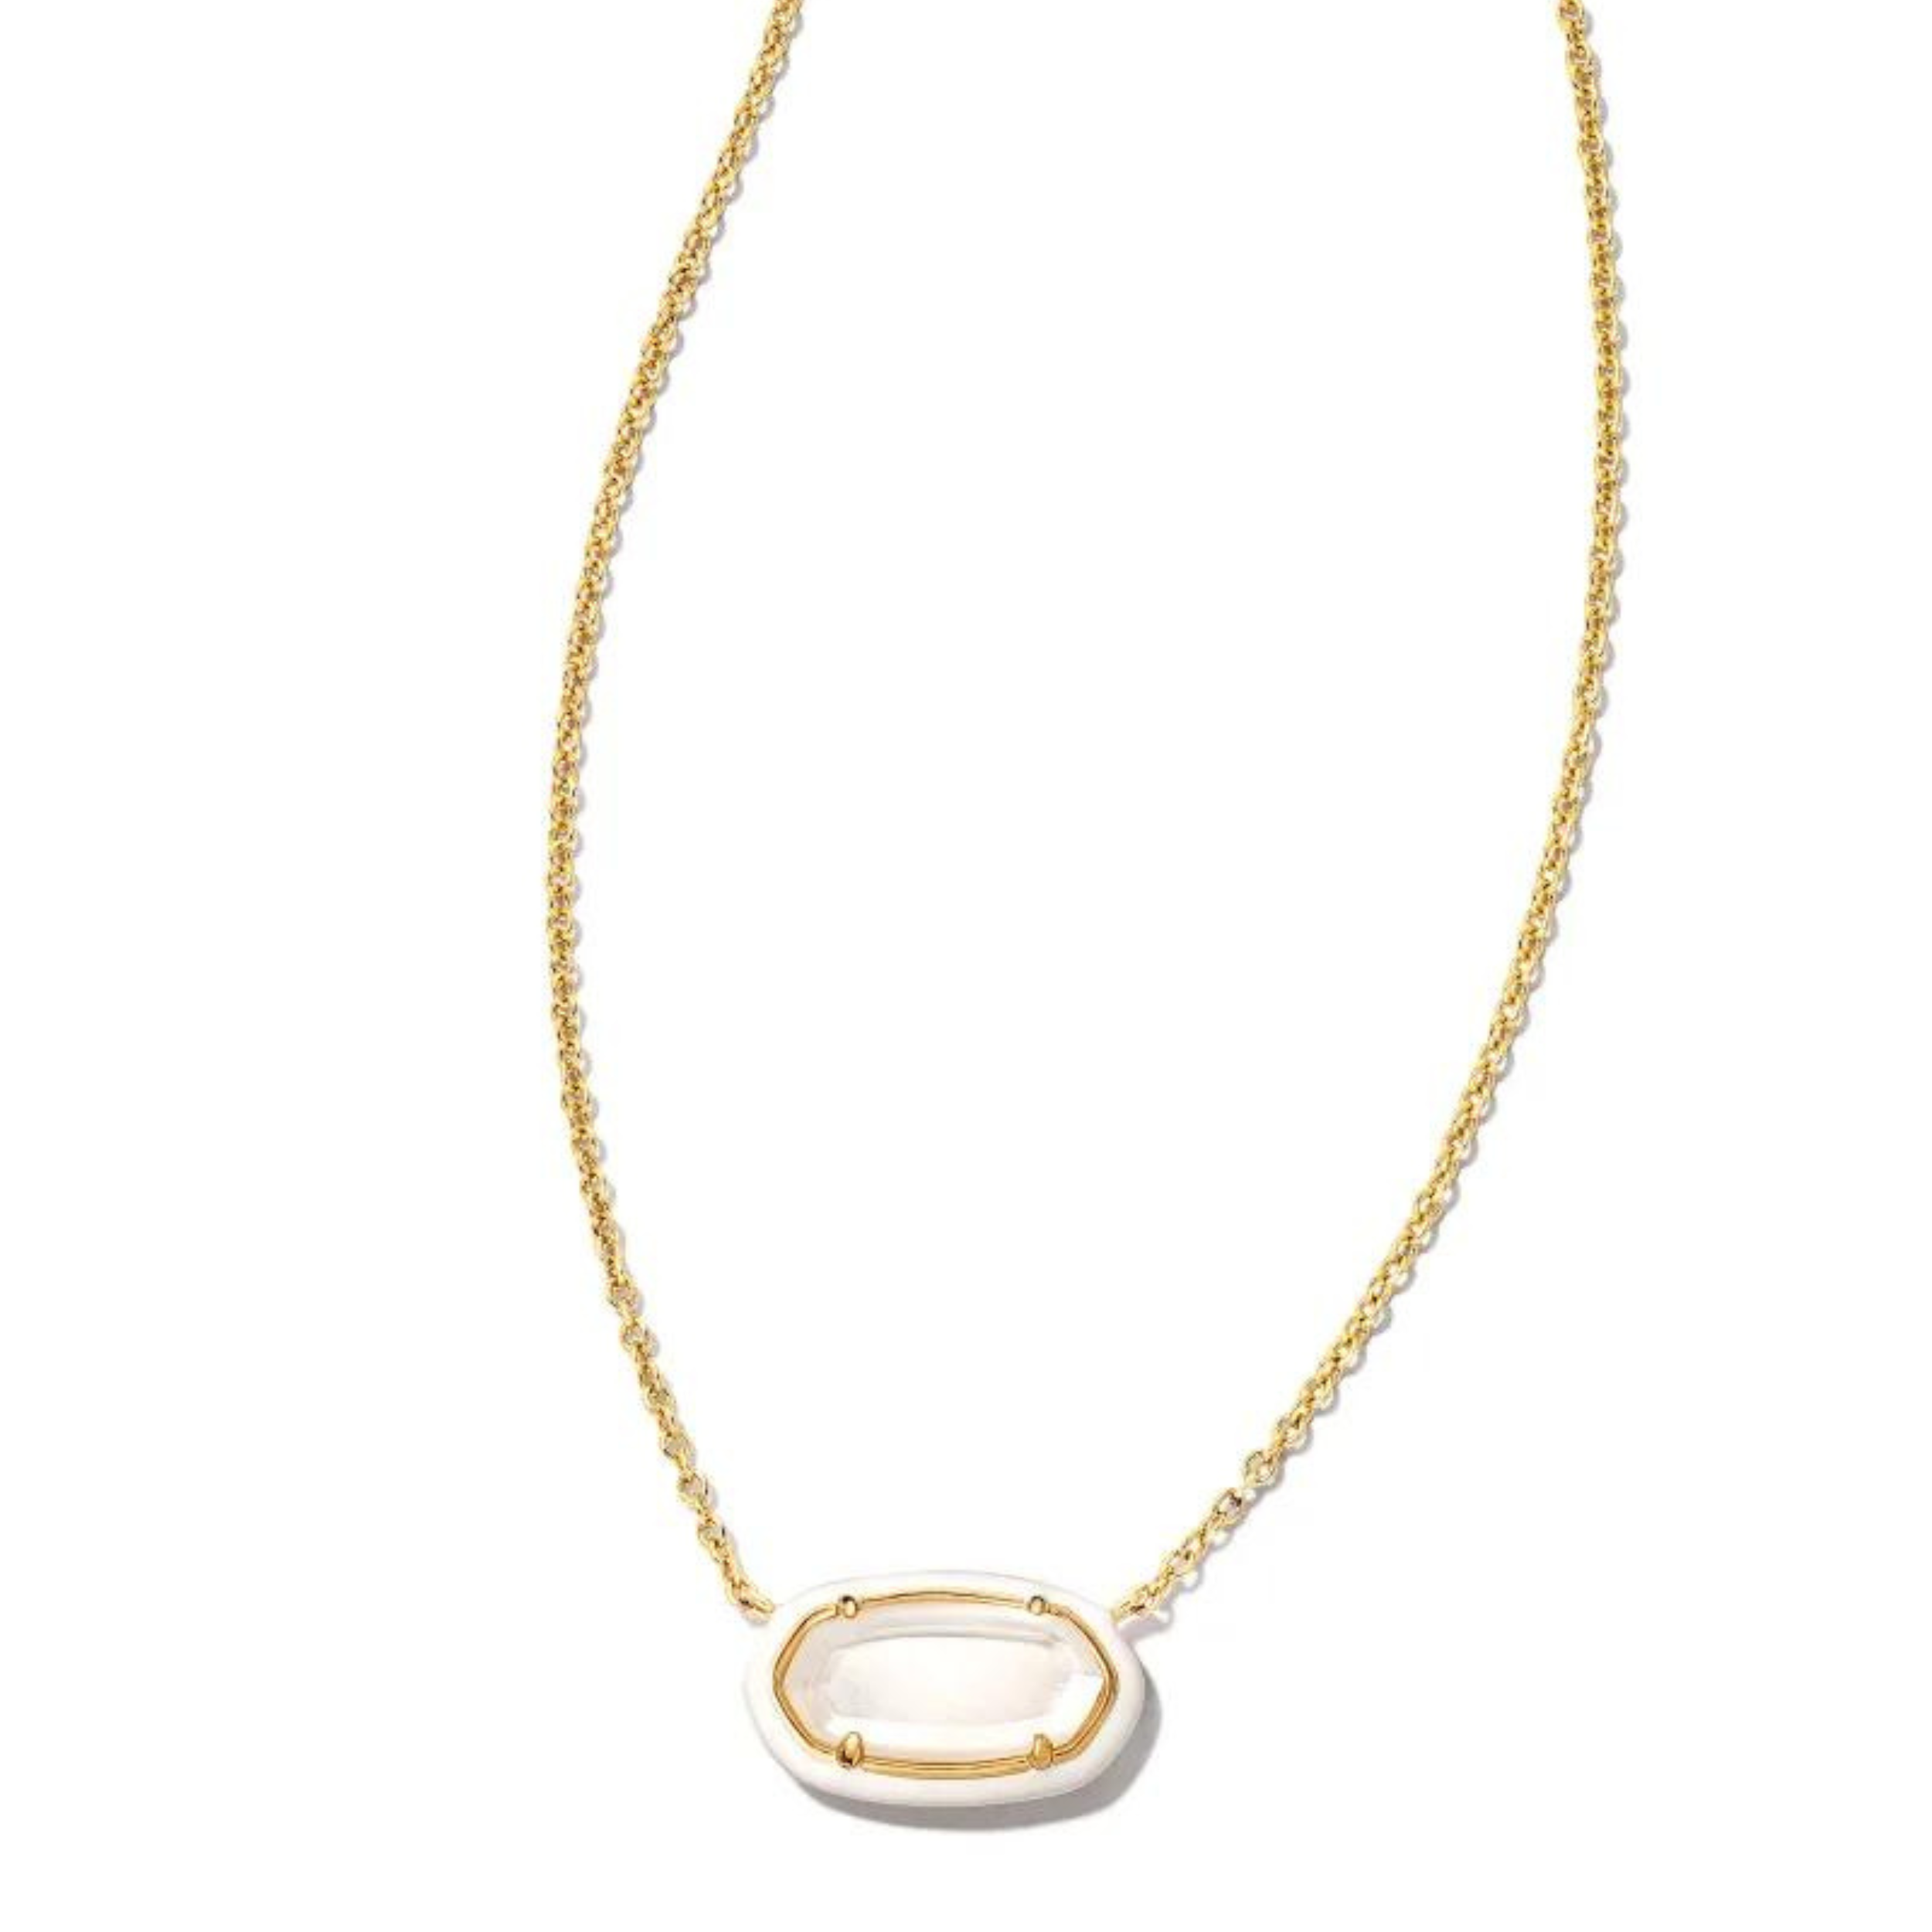 Pictured on a white background is a gold chain necklace with an oval pendant. This pendant is white and gold.  